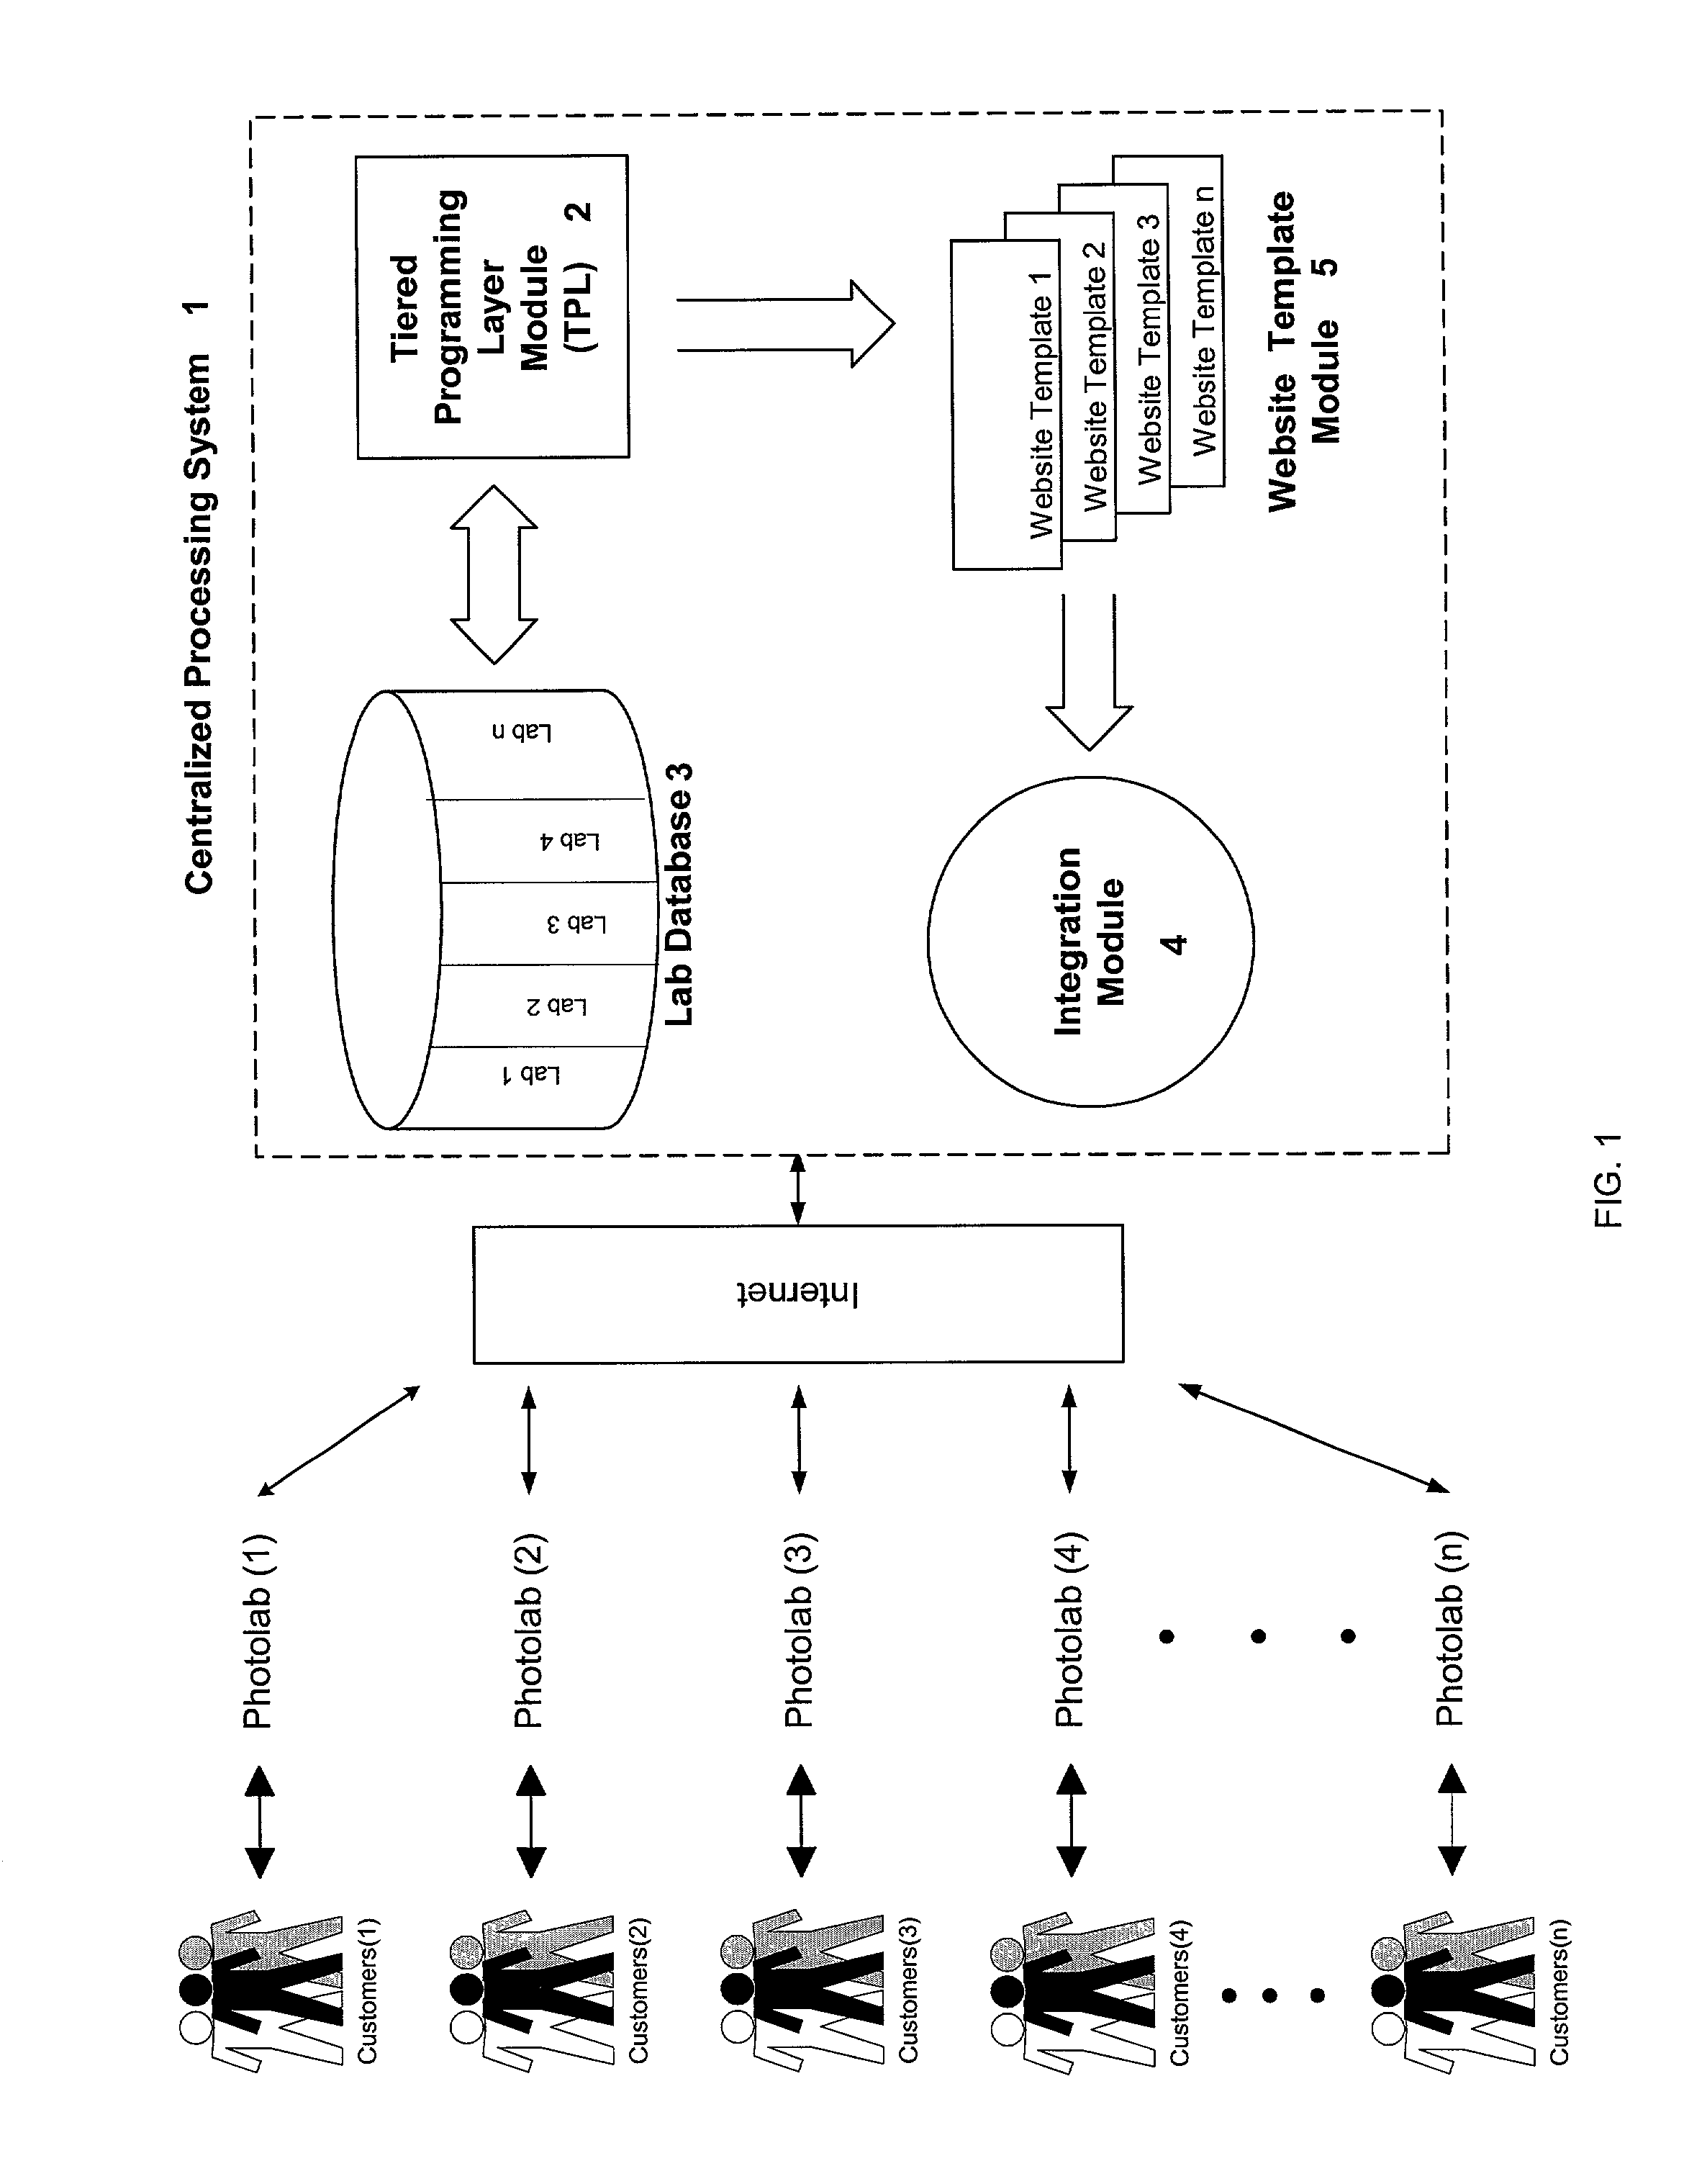 Method for enabling a photolab to process digital images and related data